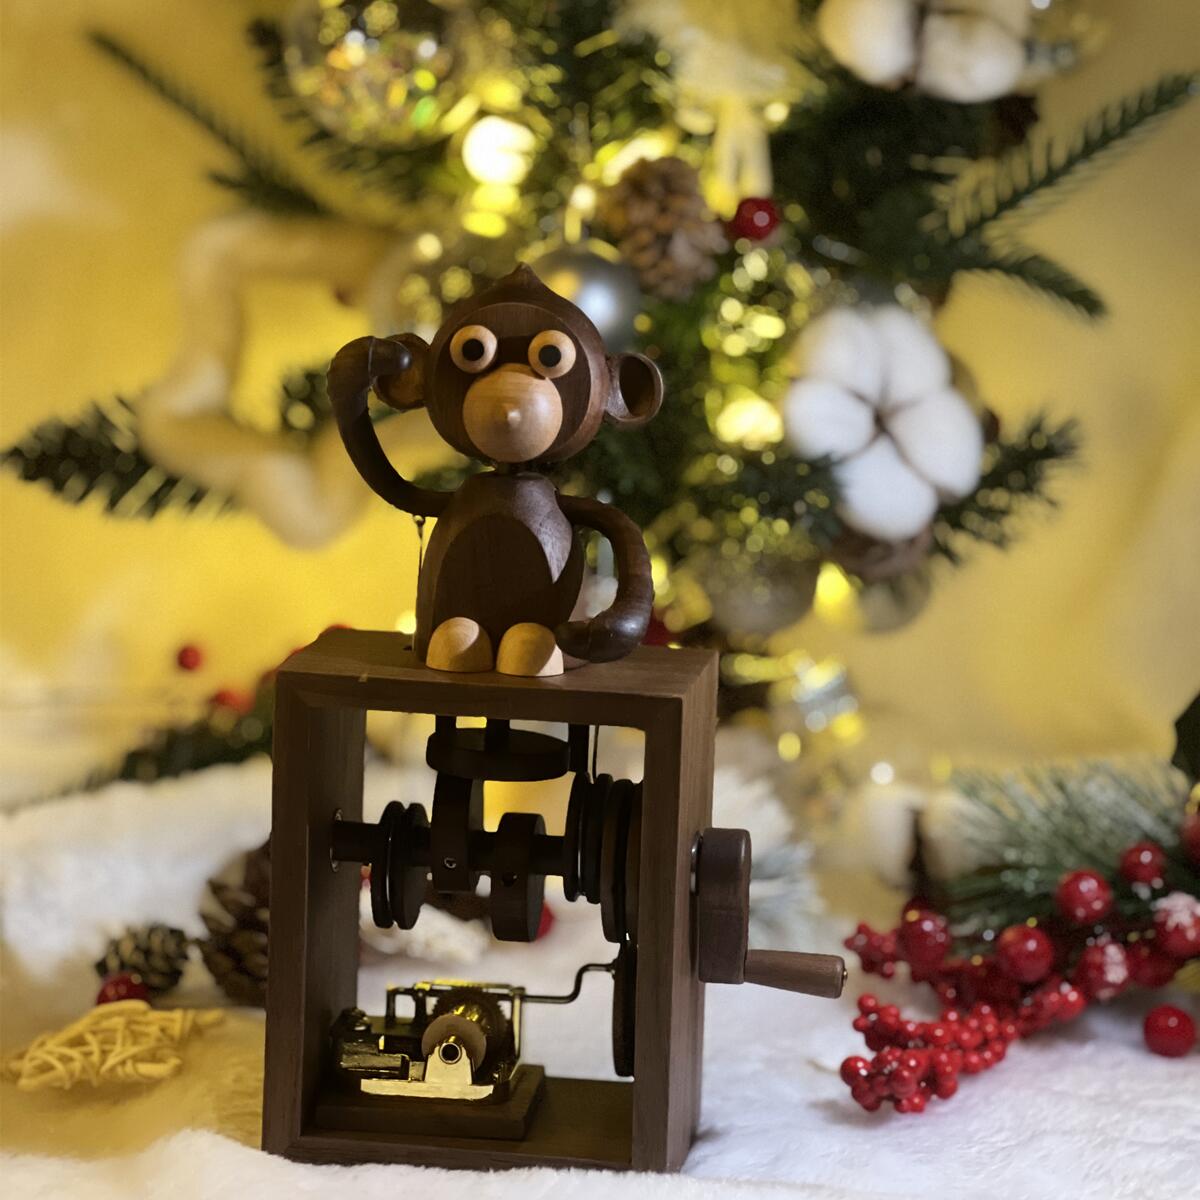 Handmade Monkey-Themed Wooden Hand-Crank Music Box (Melody  Castle in the Sky)